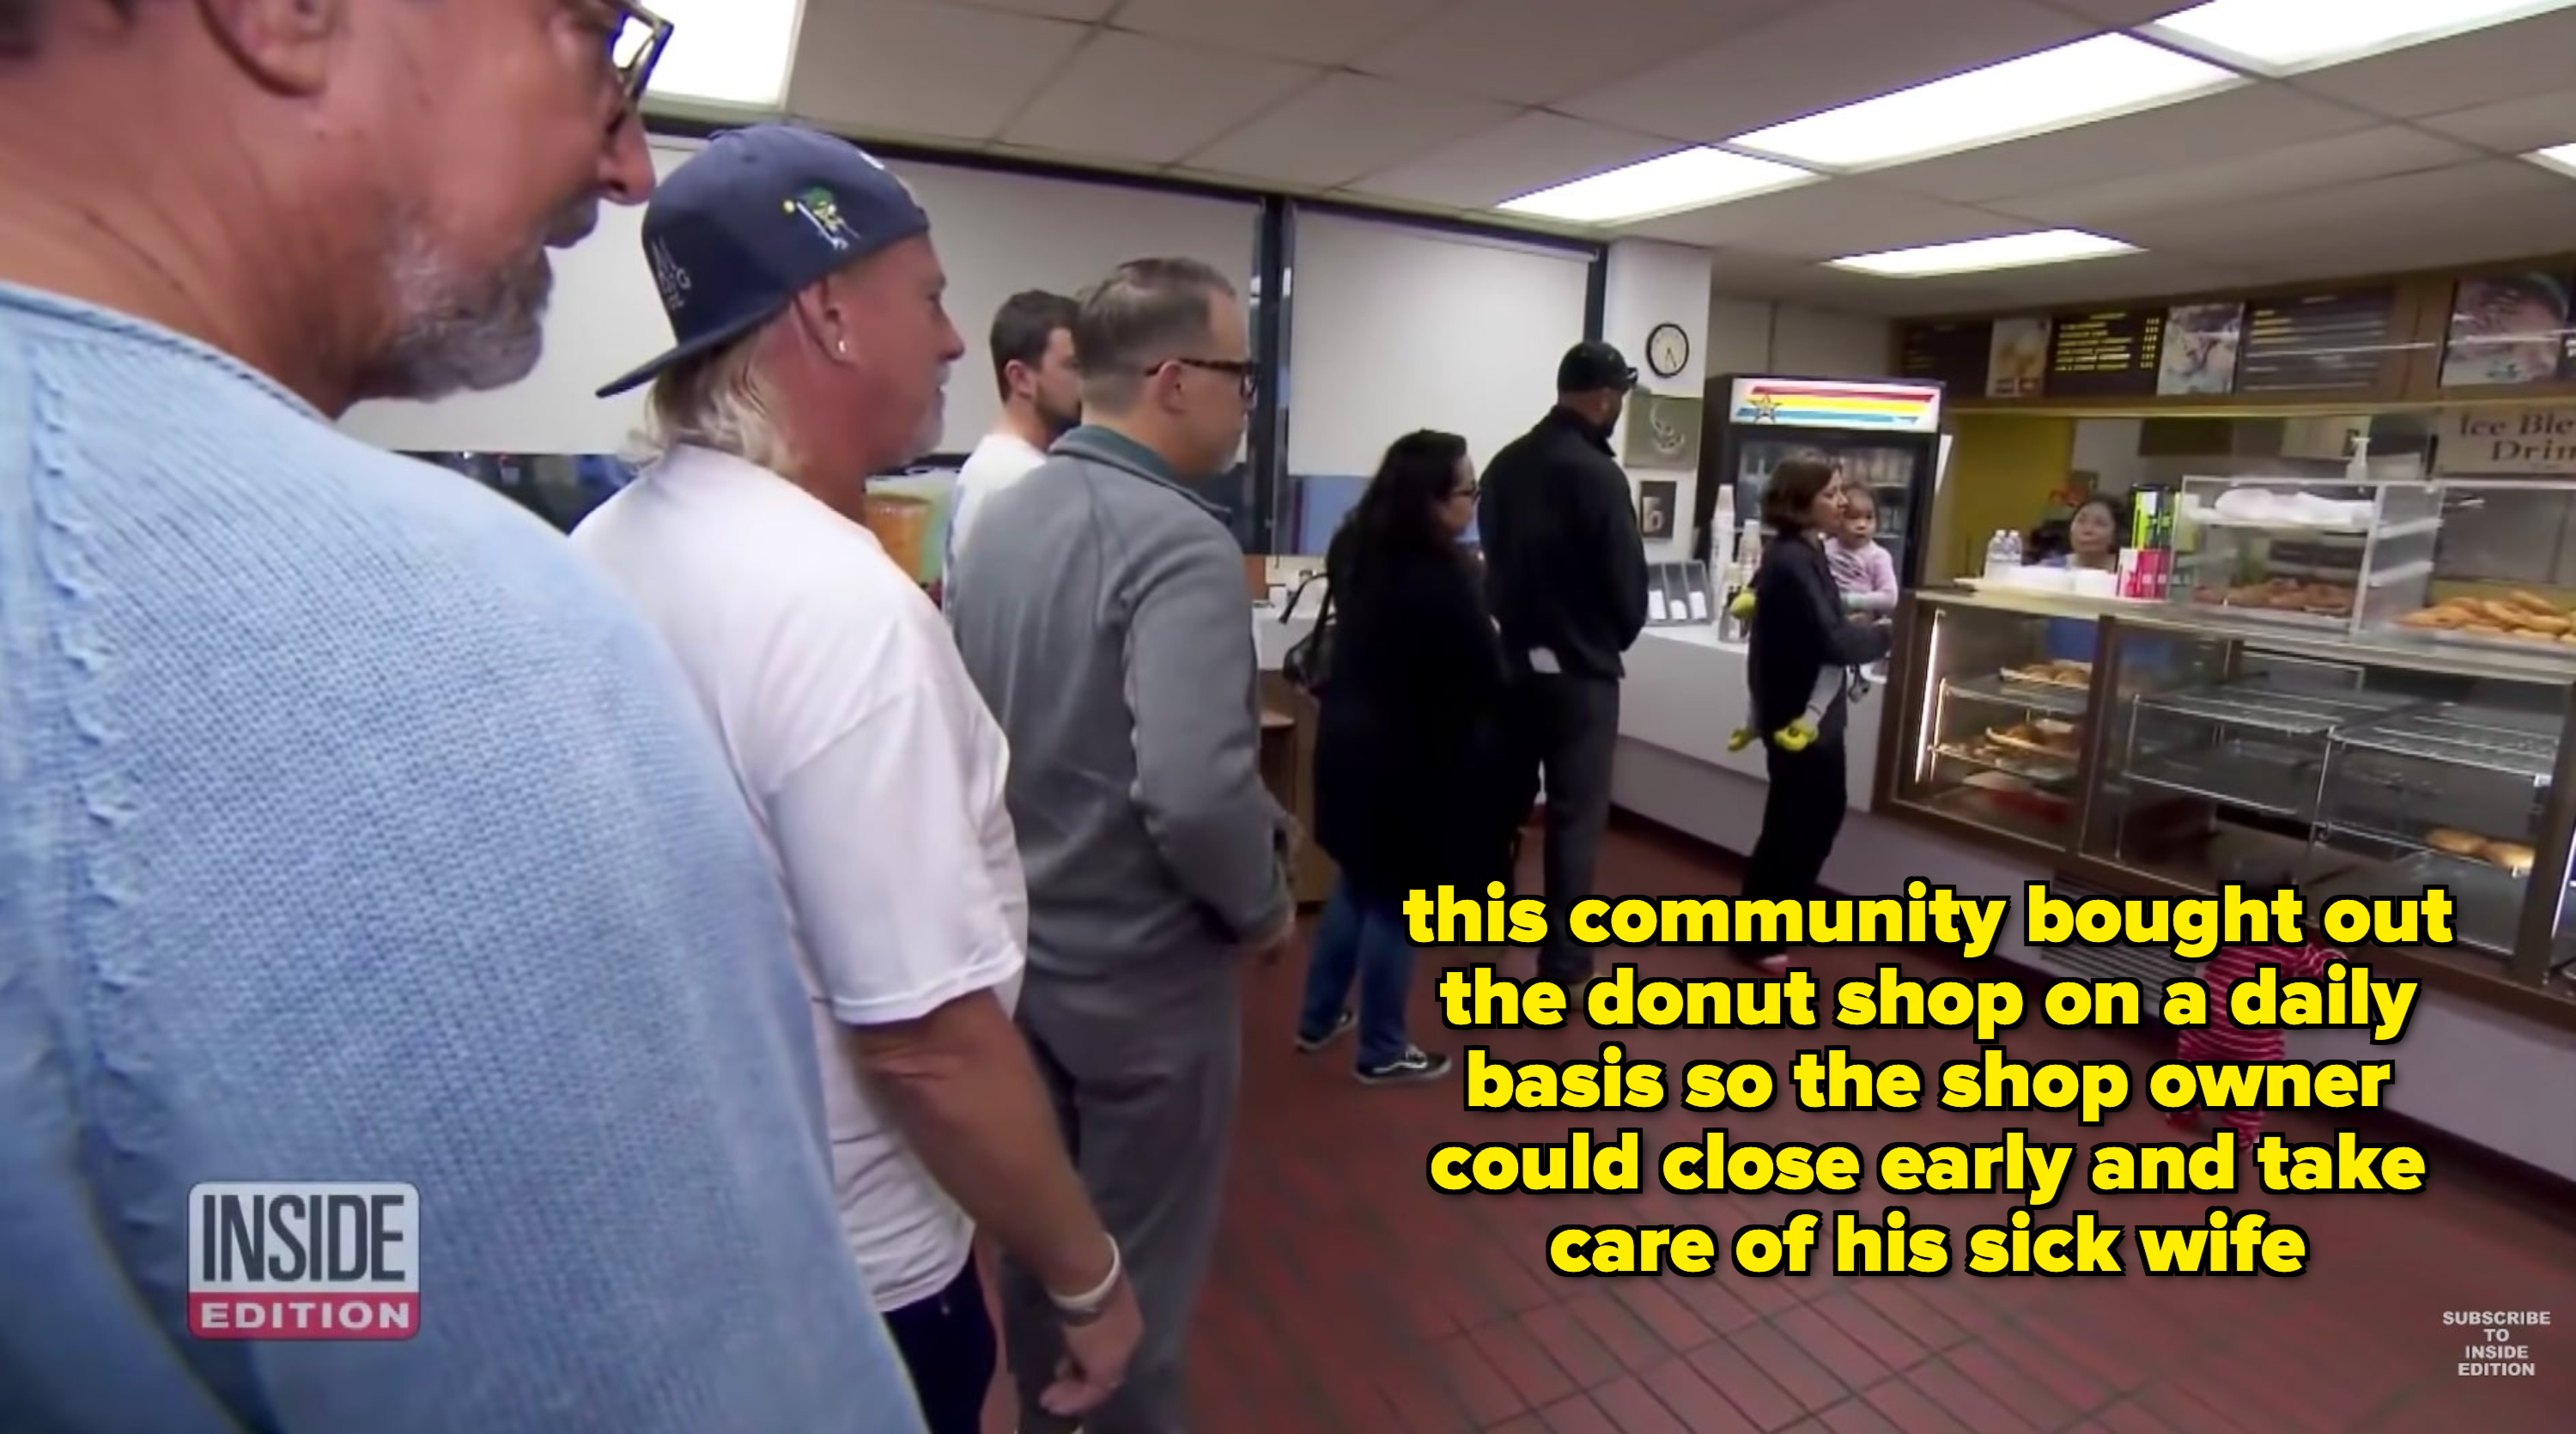 Customers are in line at a donut shop. The caption reads, &quot;This community bought out the donut shop on a daily basis so the shop owner could close early and take care of his sick wife&quot;